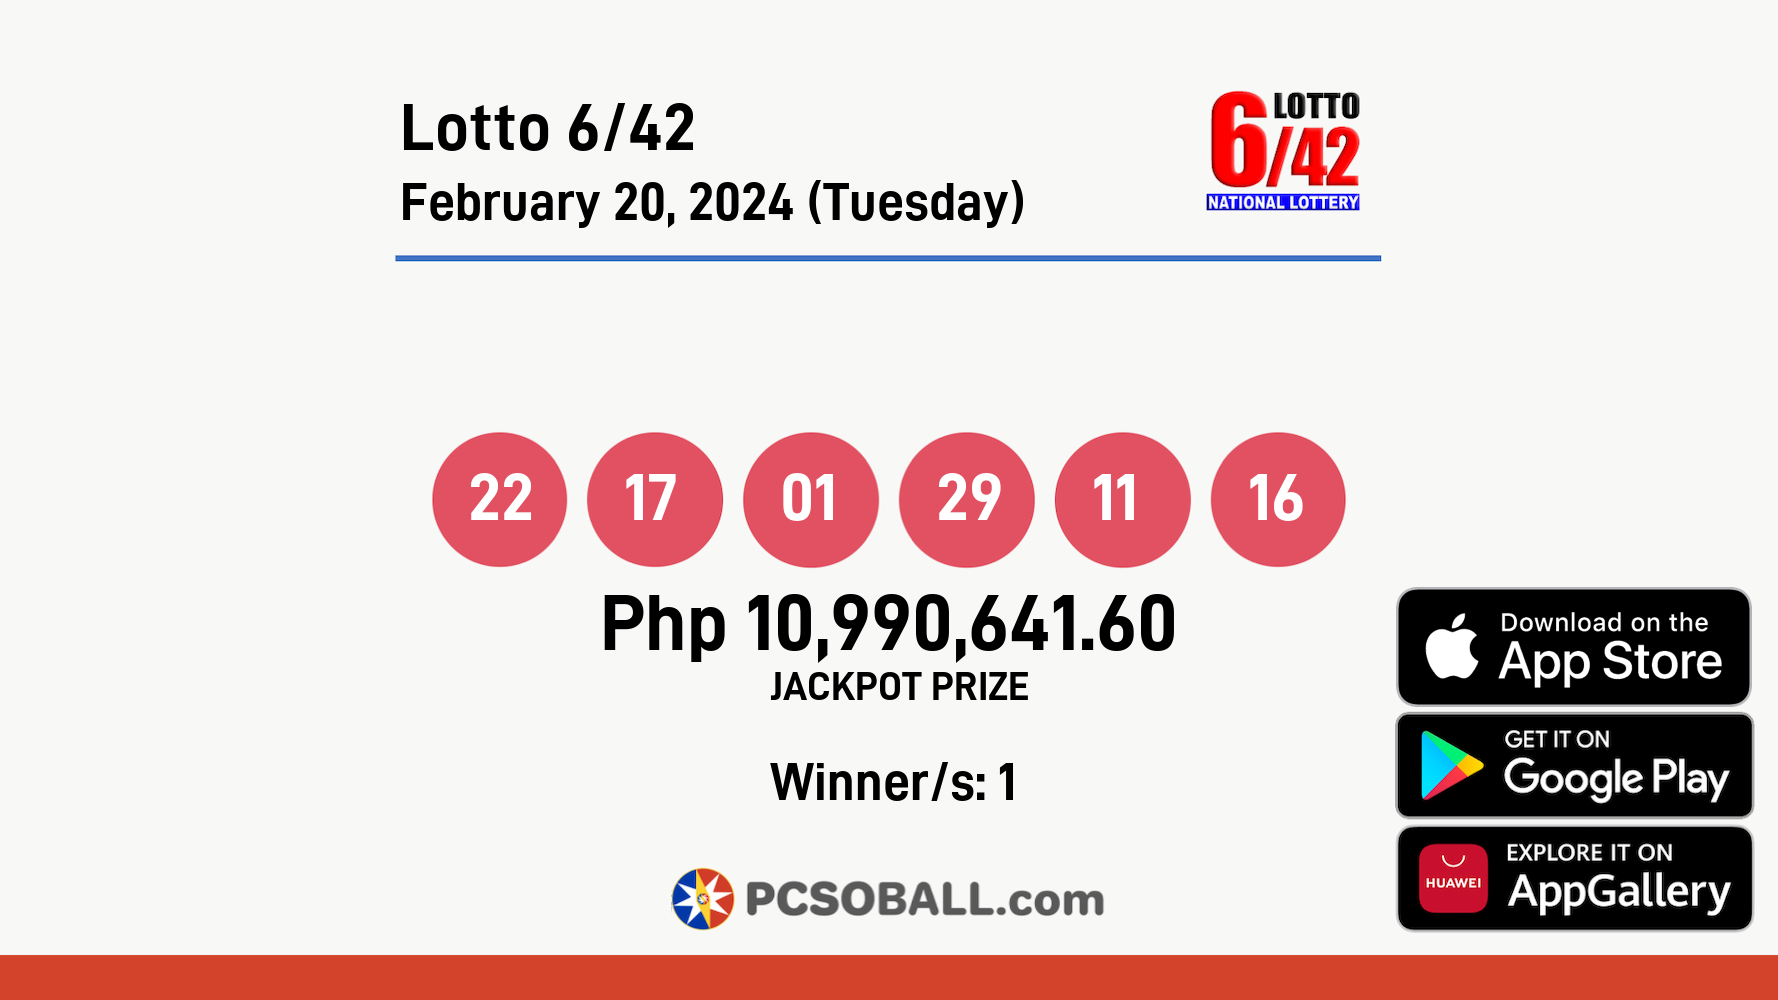 Lotto 6/42 February 20, 2024 (Tuesday) Result